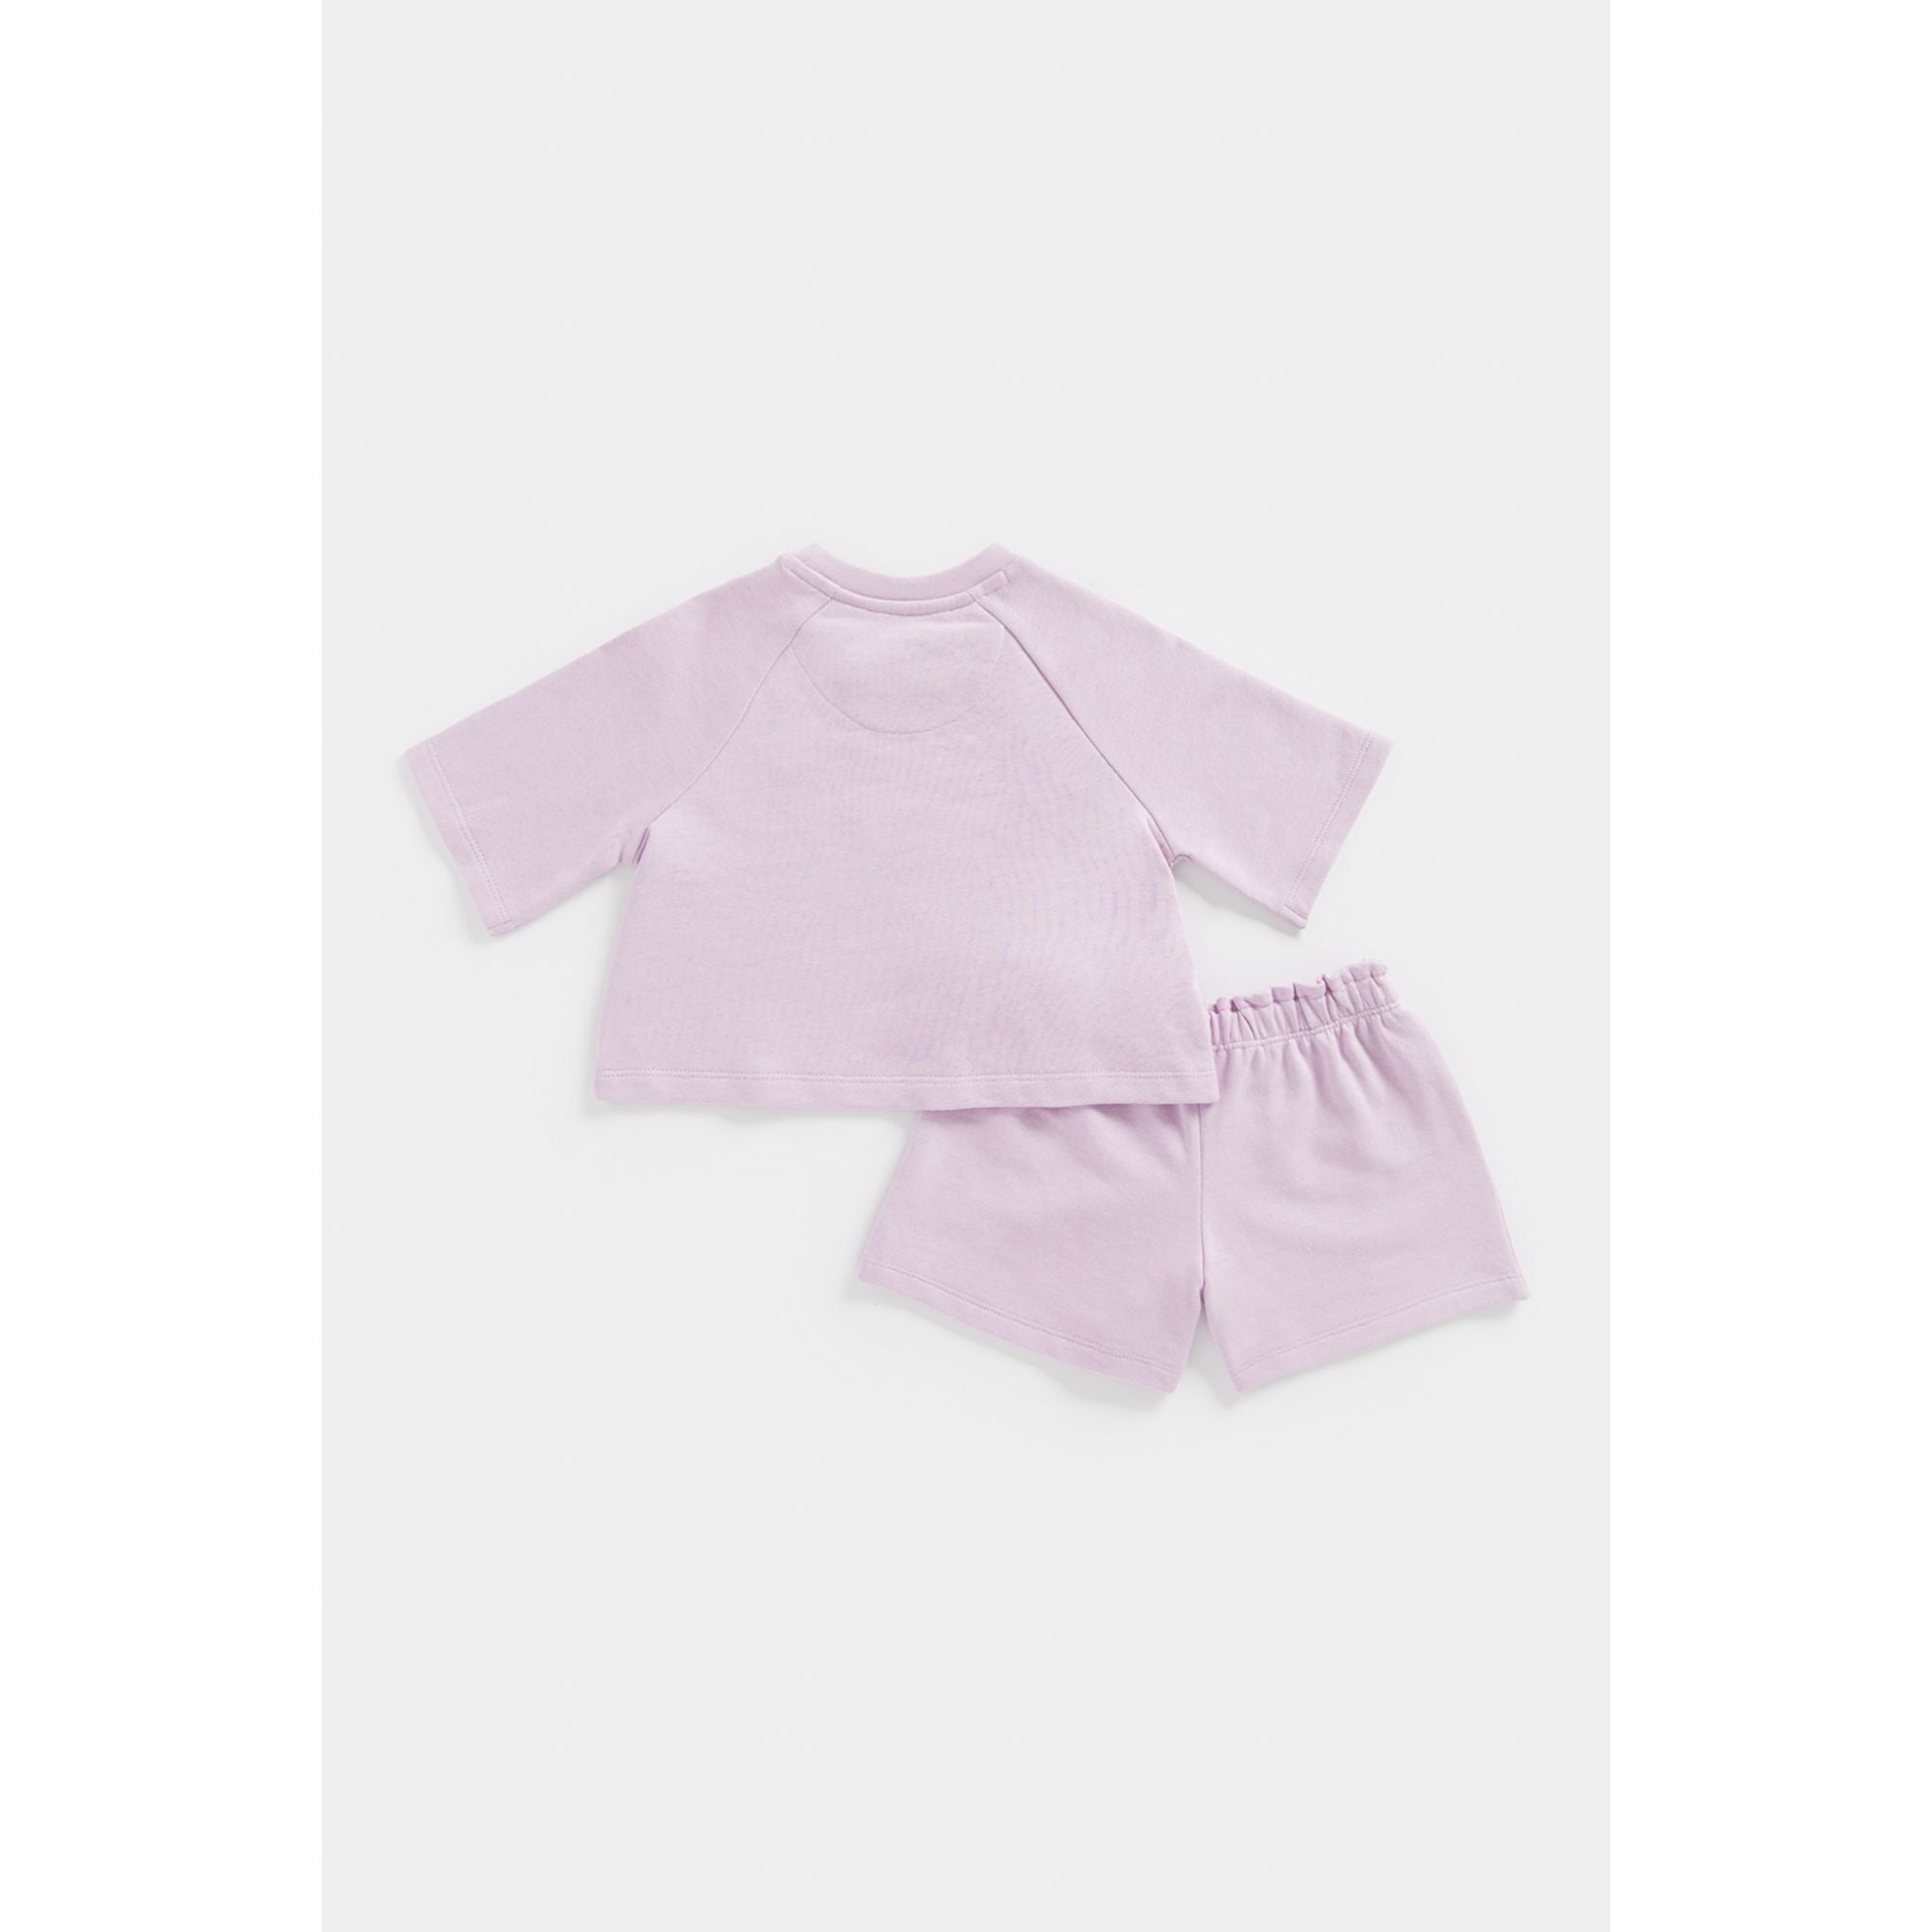 Mothercare Butterfly Top and Short Set